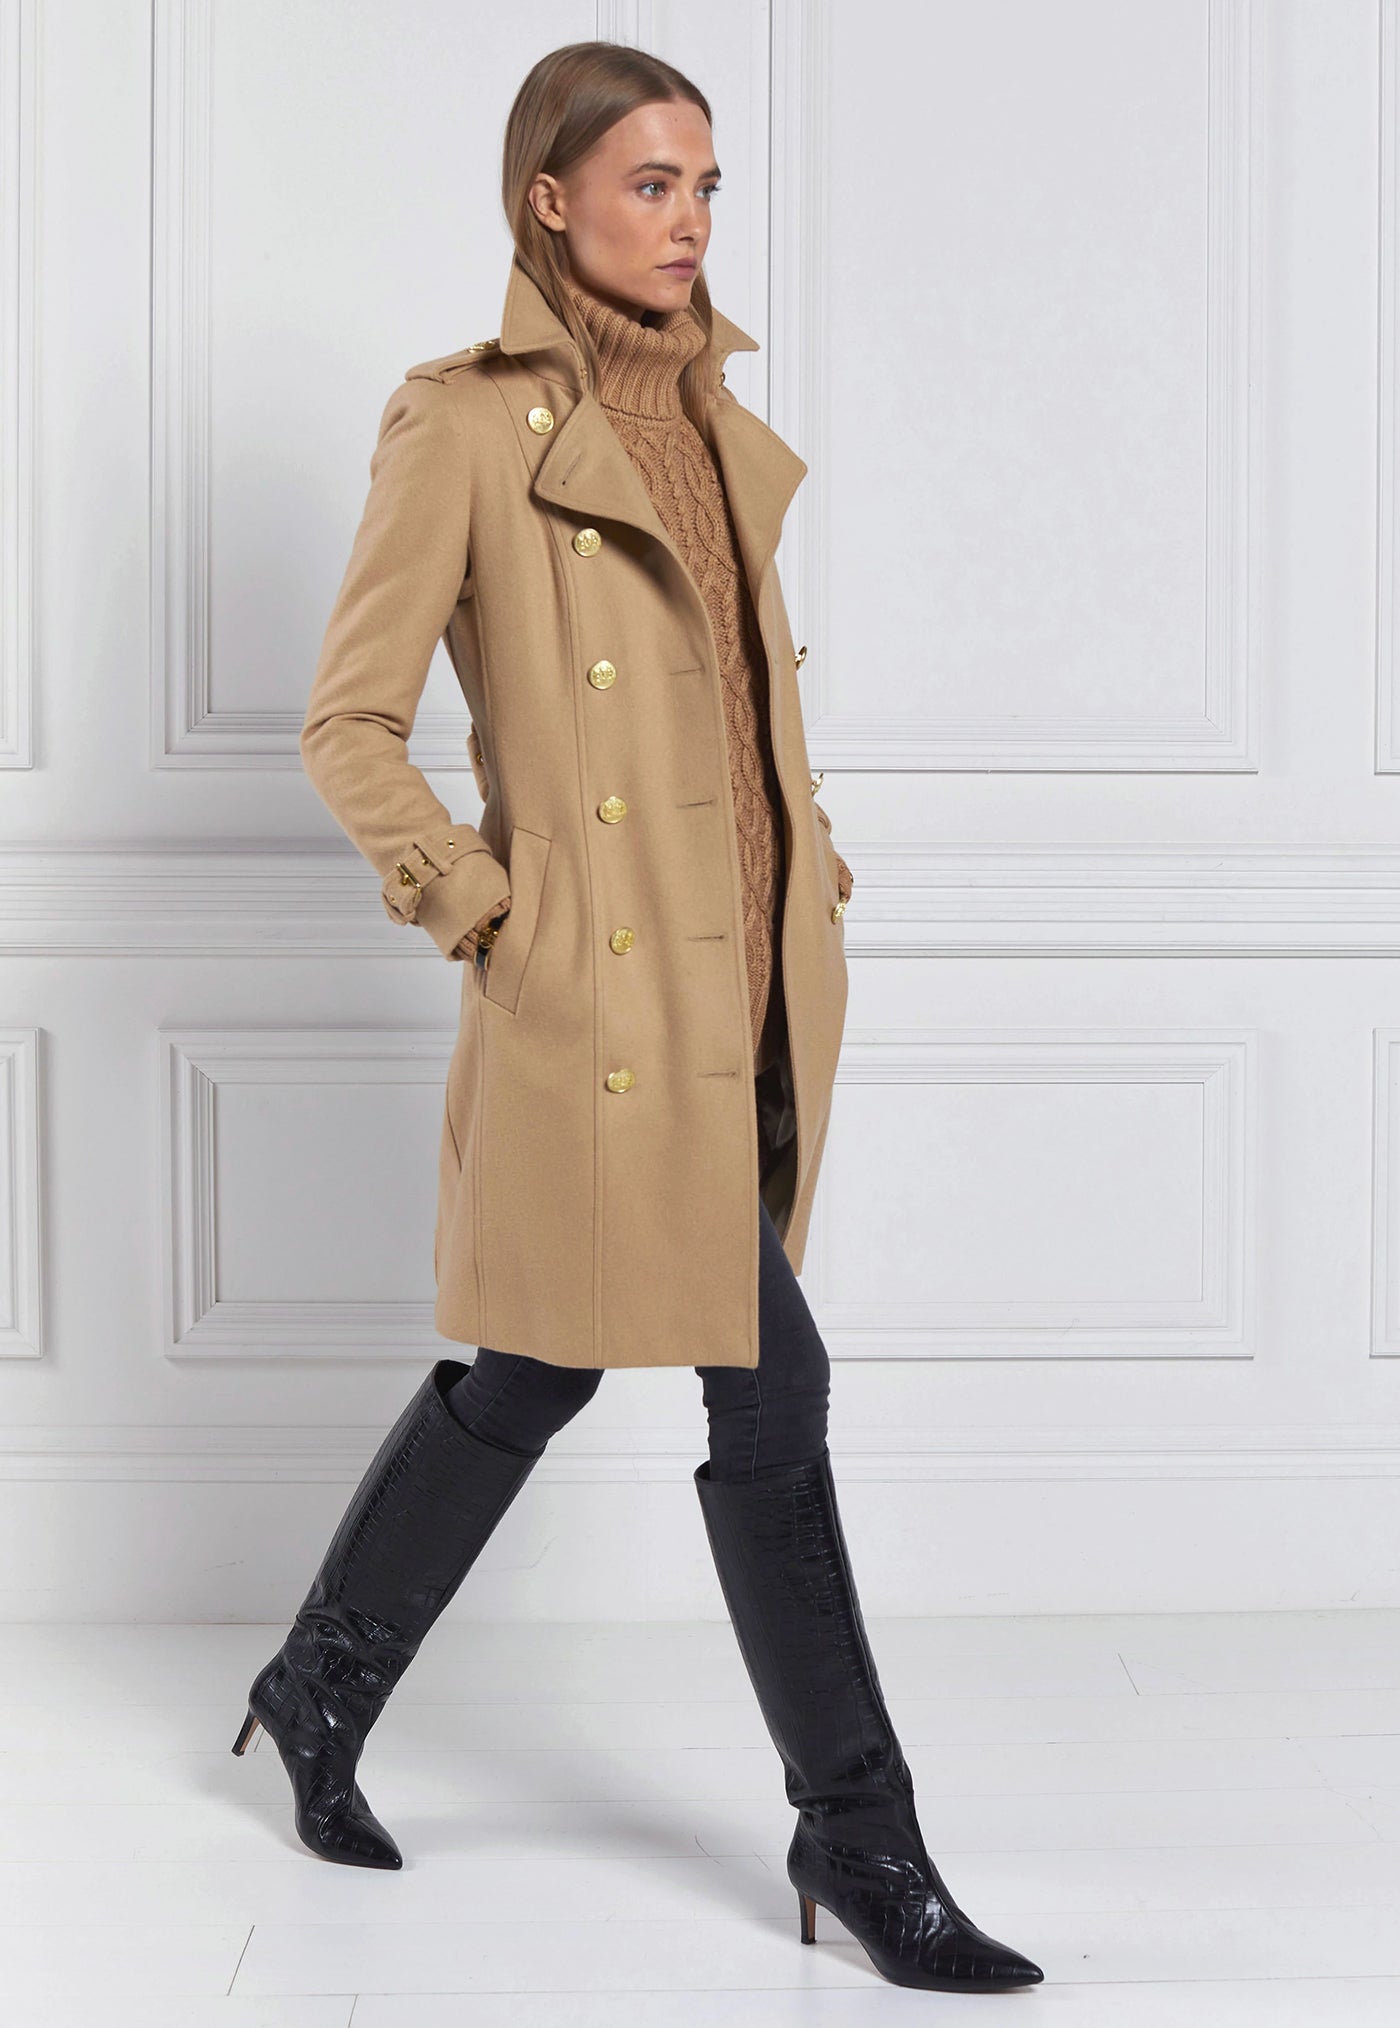 Marlborough Trench Coat - Camel sold by Angel Divine